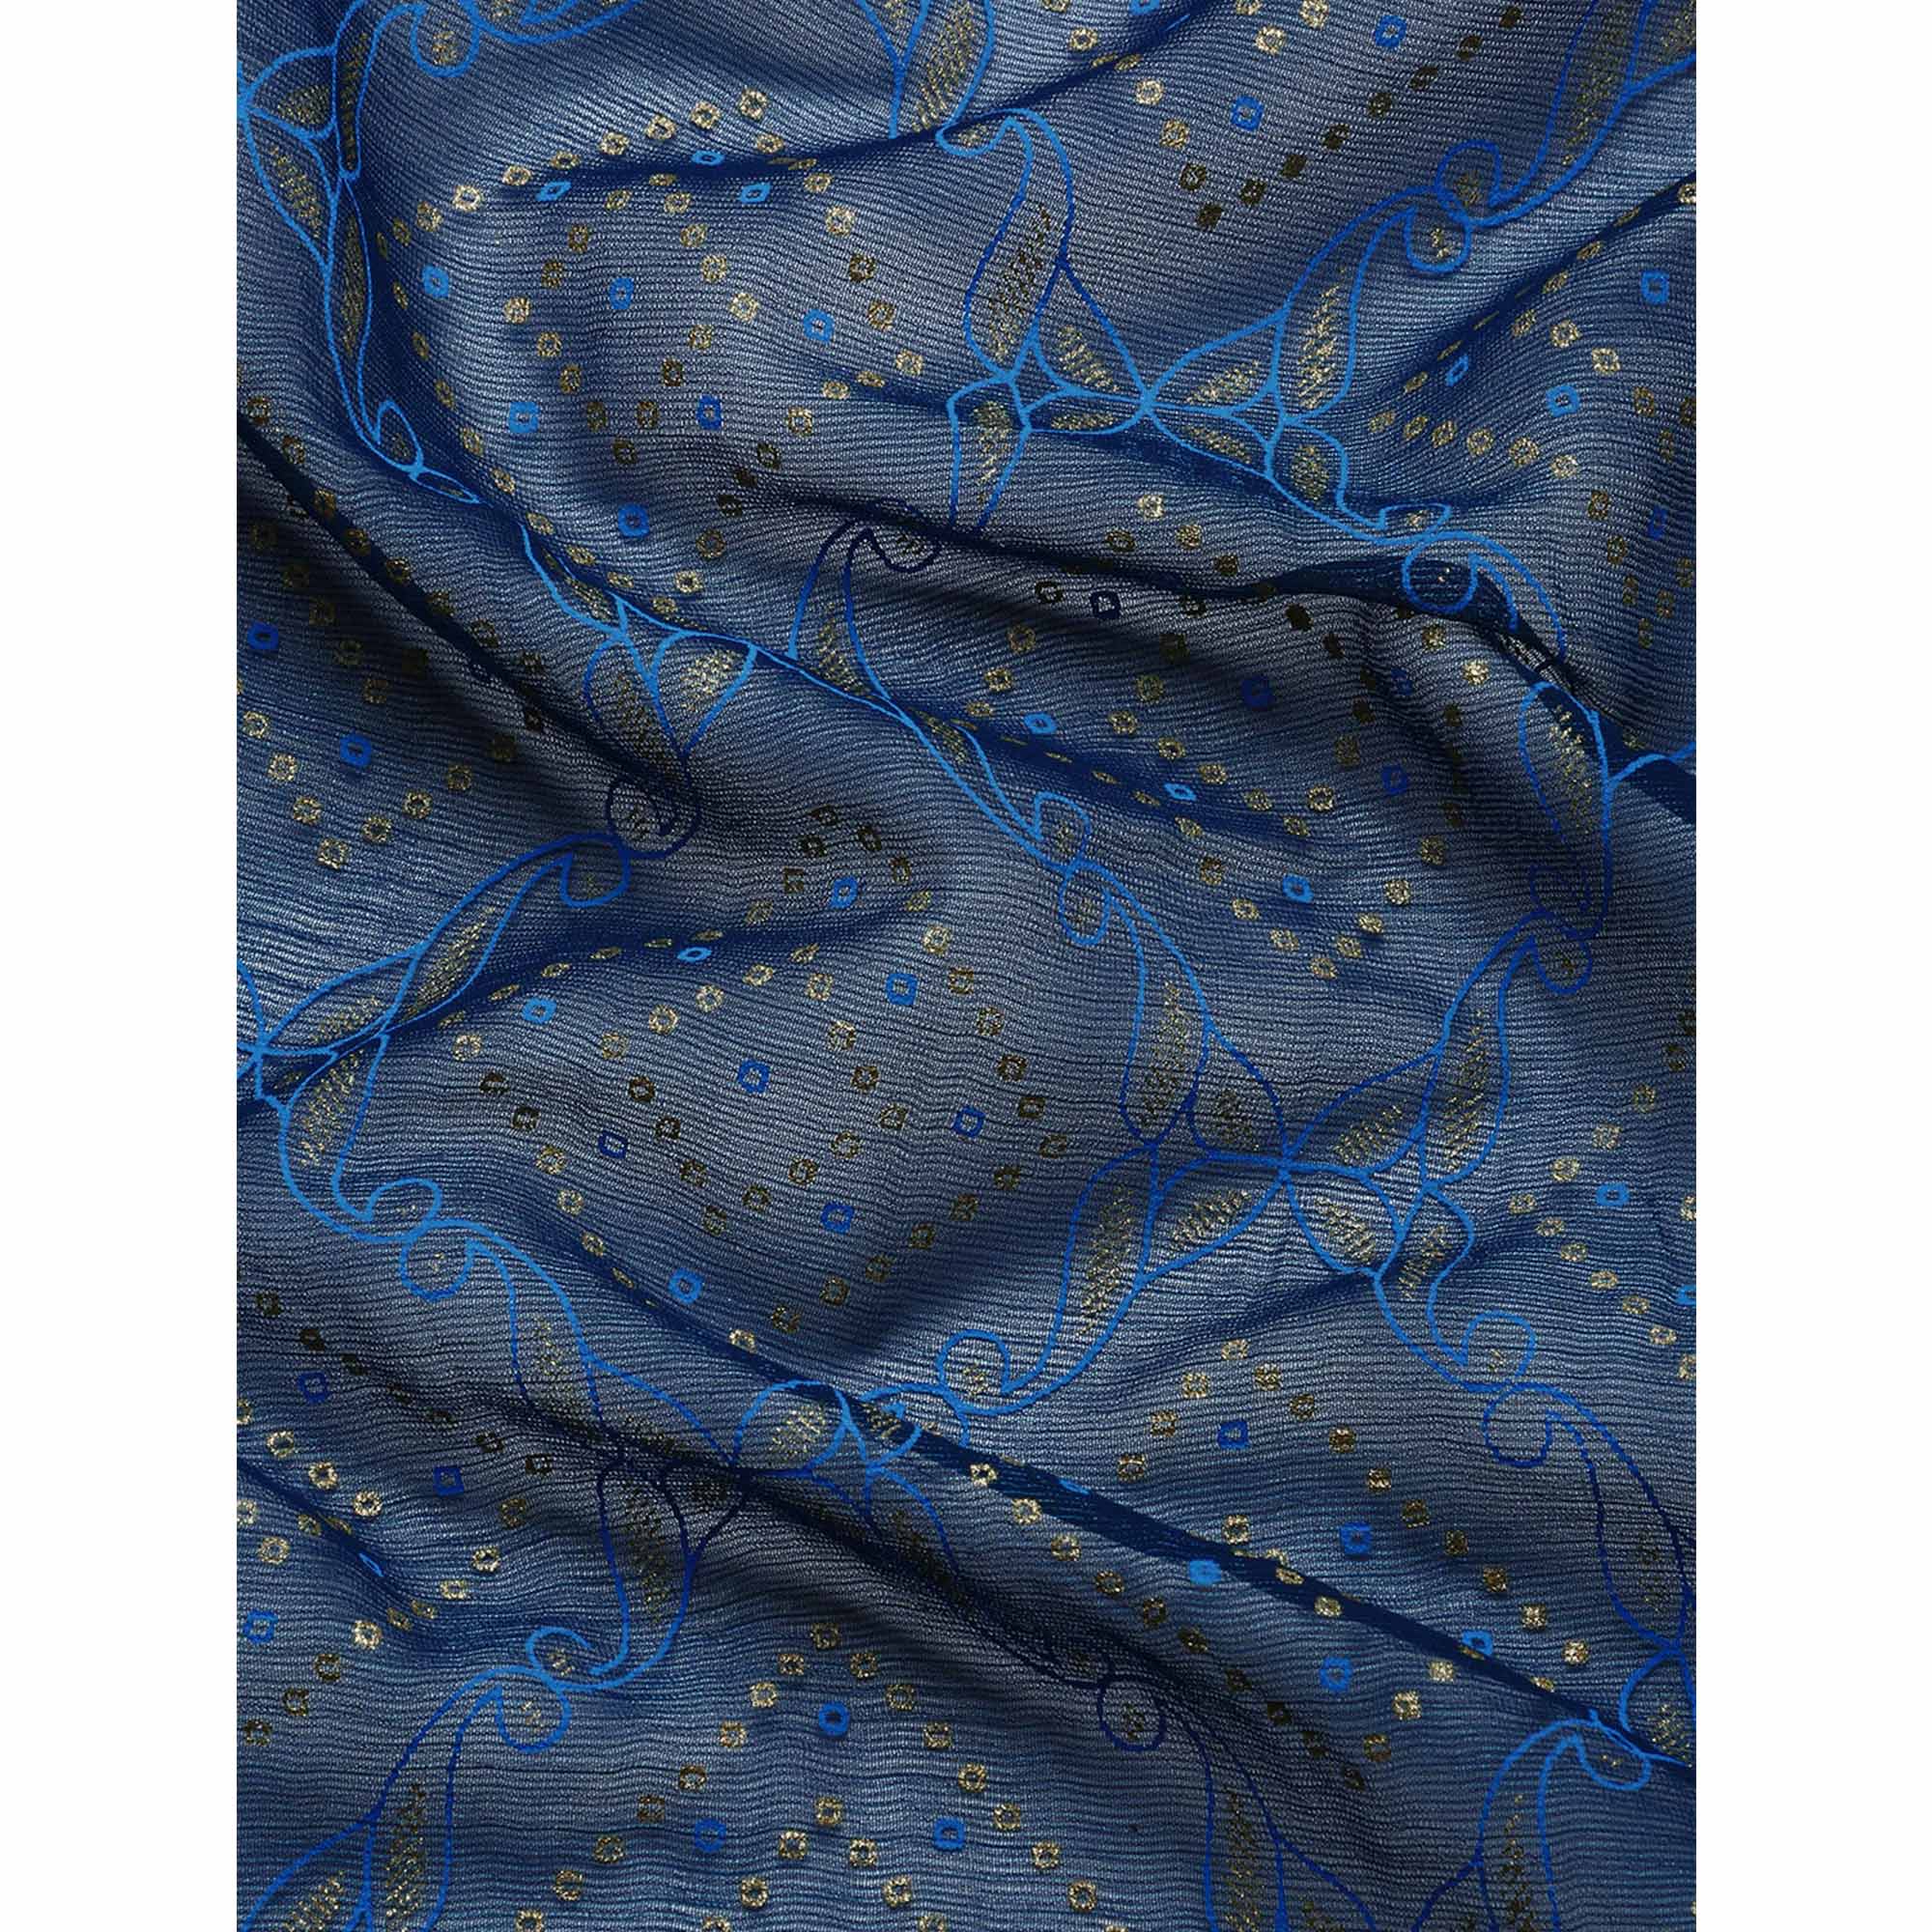 Blue Foil Printed With Fancy Border Chiffon Saree